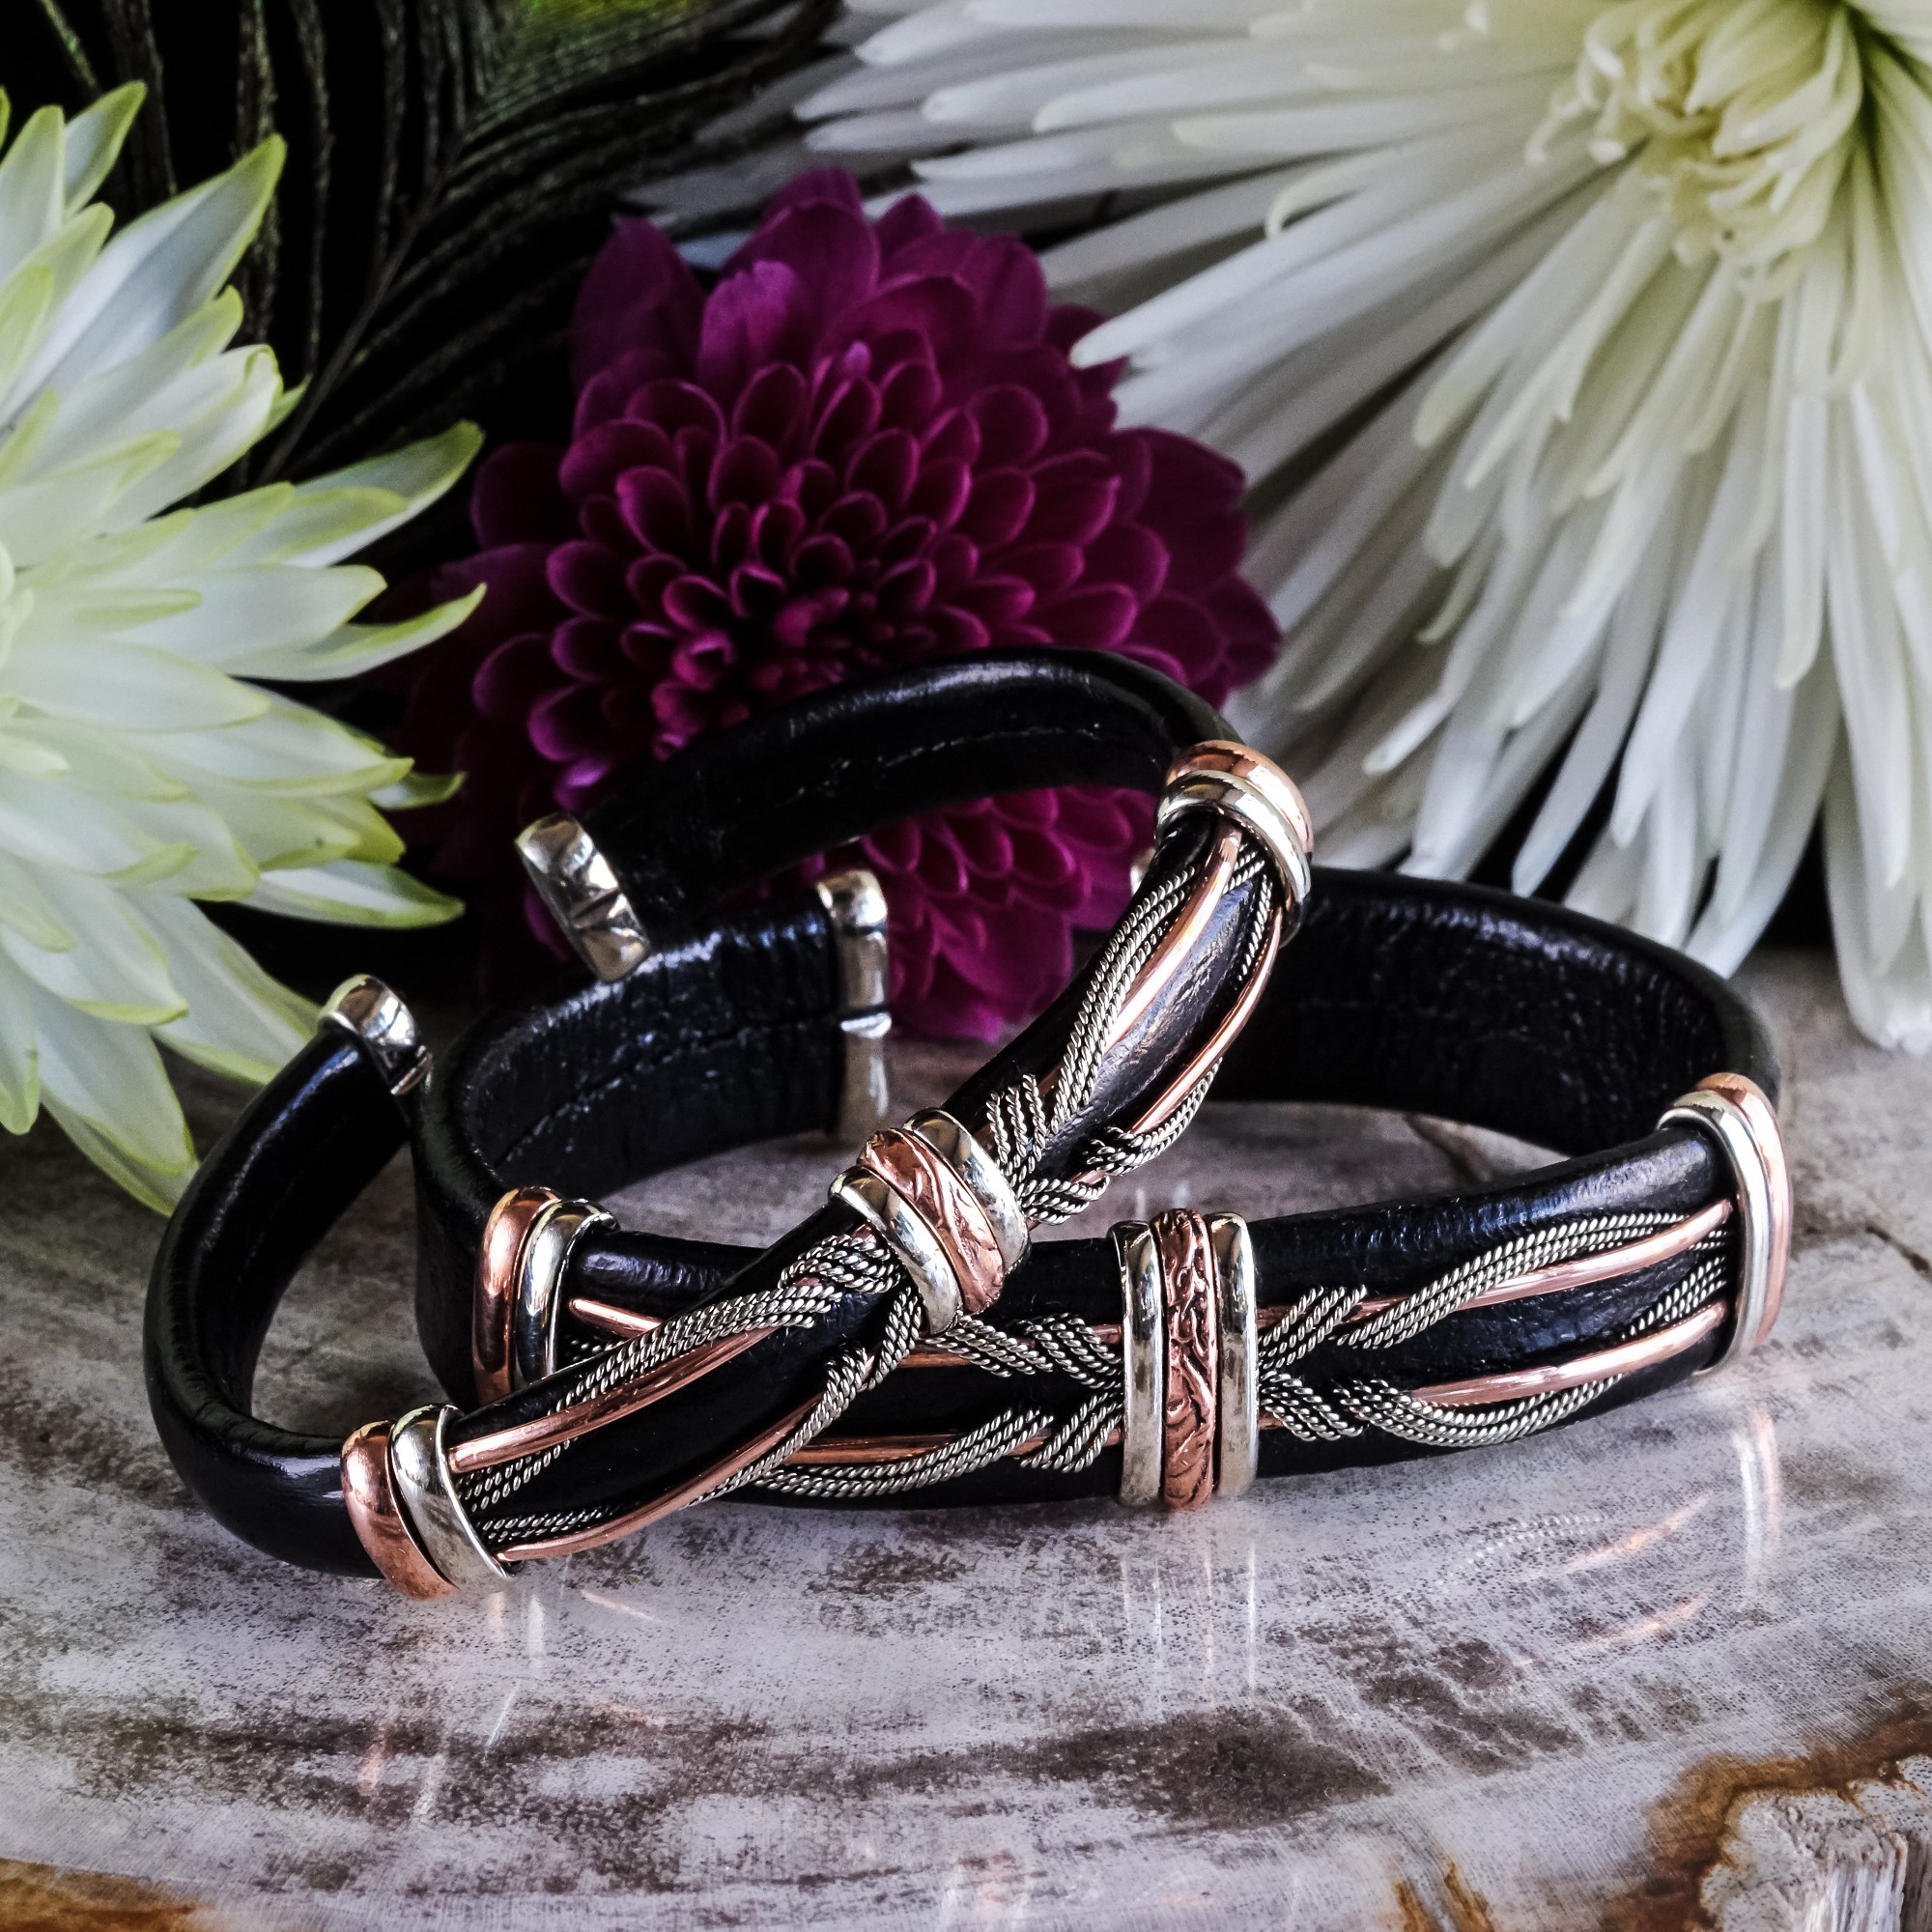 Copper Healing Bracelets for alignment, circulation, and pain relief